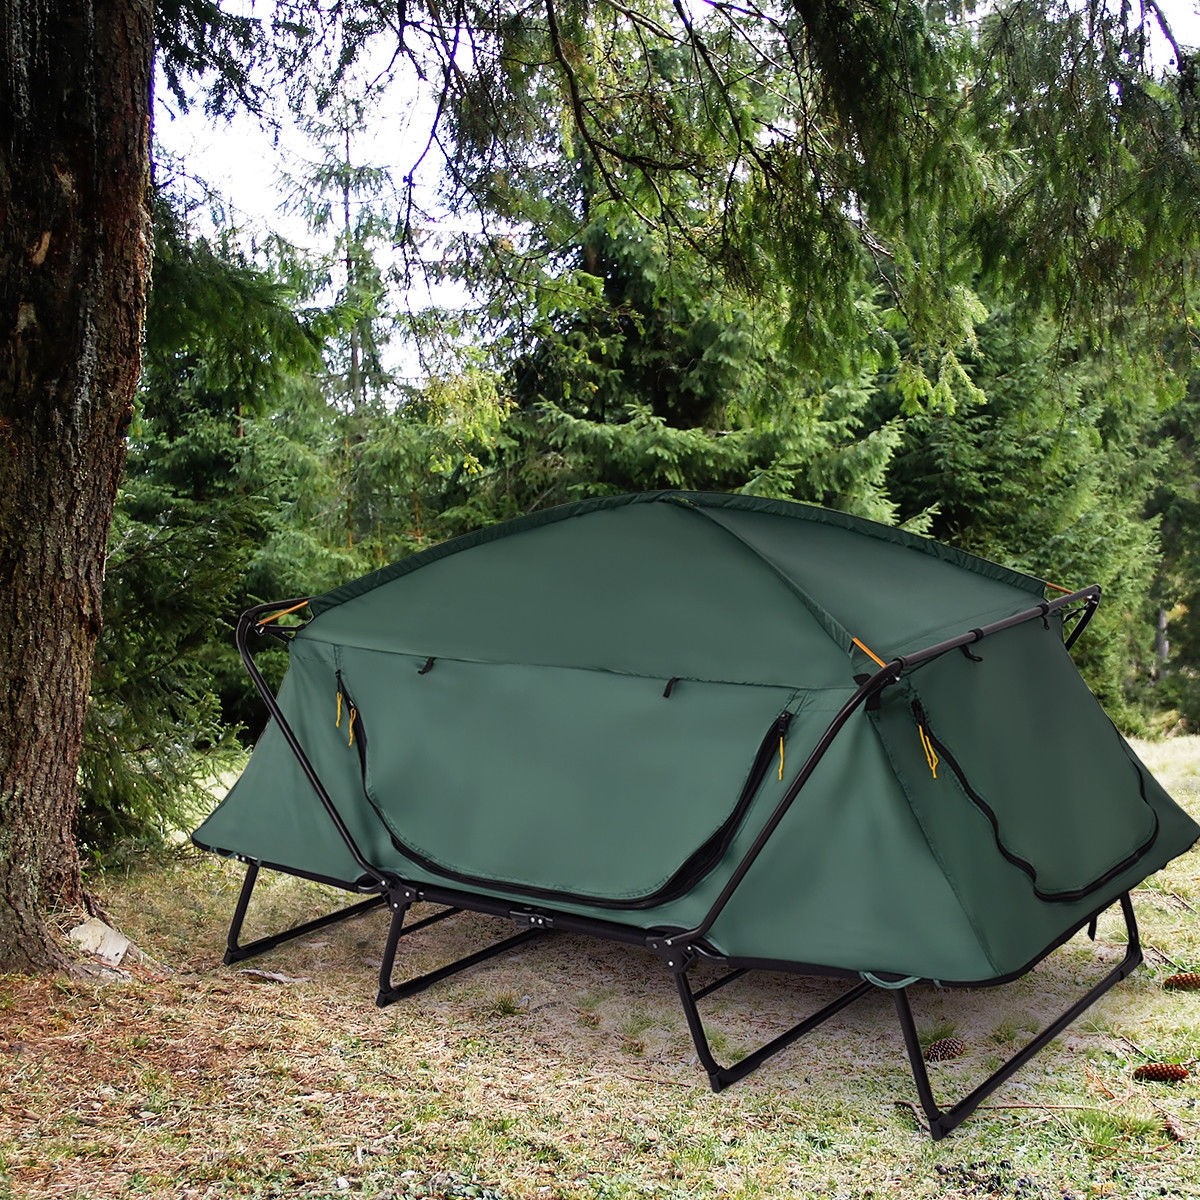 2 Person Waterproof Folding Camping Tent With Carry Bag